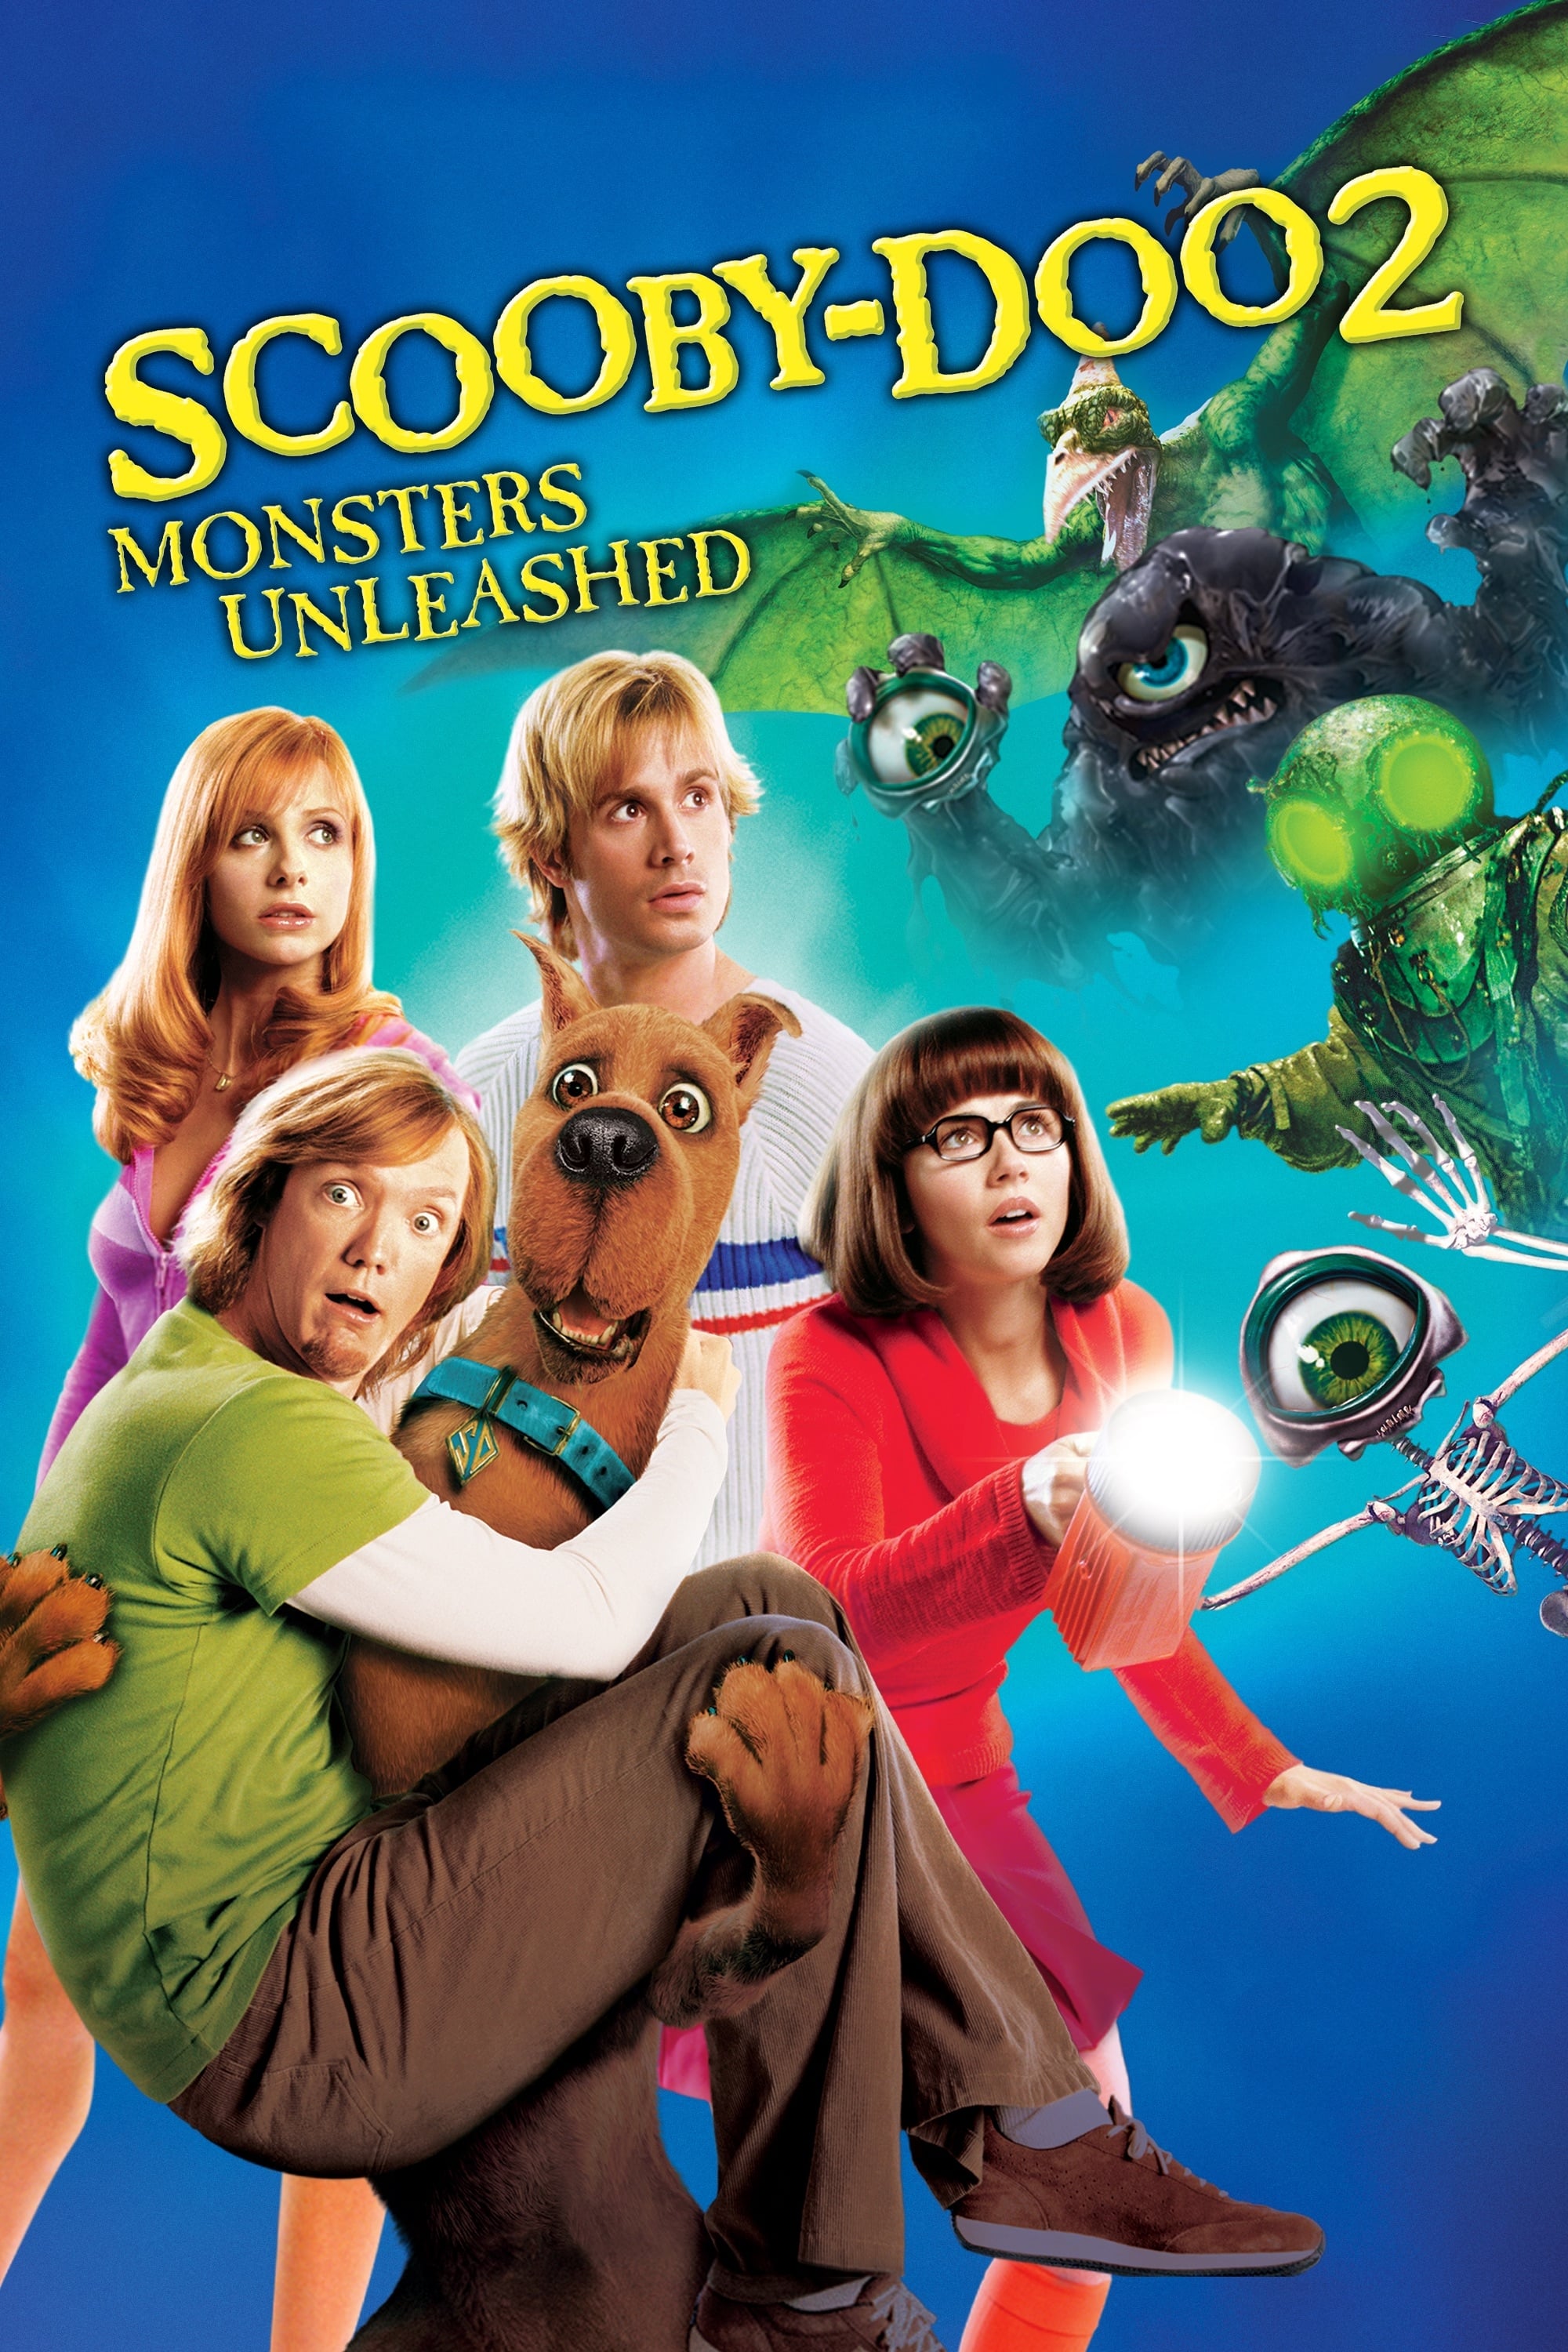 Scooby Doo 2 Monsters Unleashed Sugar Movies 